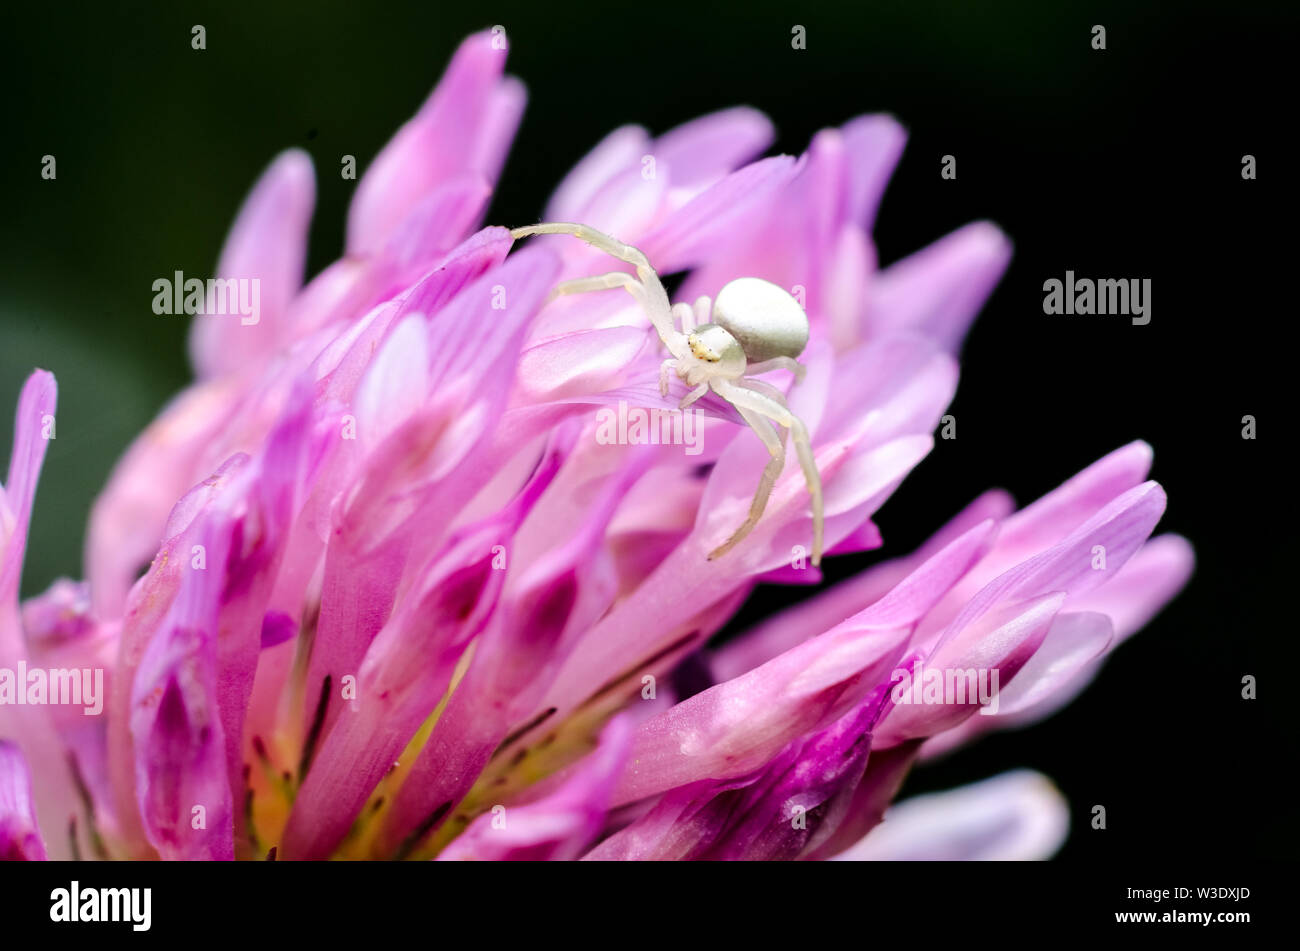 Thomisidae, Macro photograph of a tiny crab spider on a purple flower Stock Photo